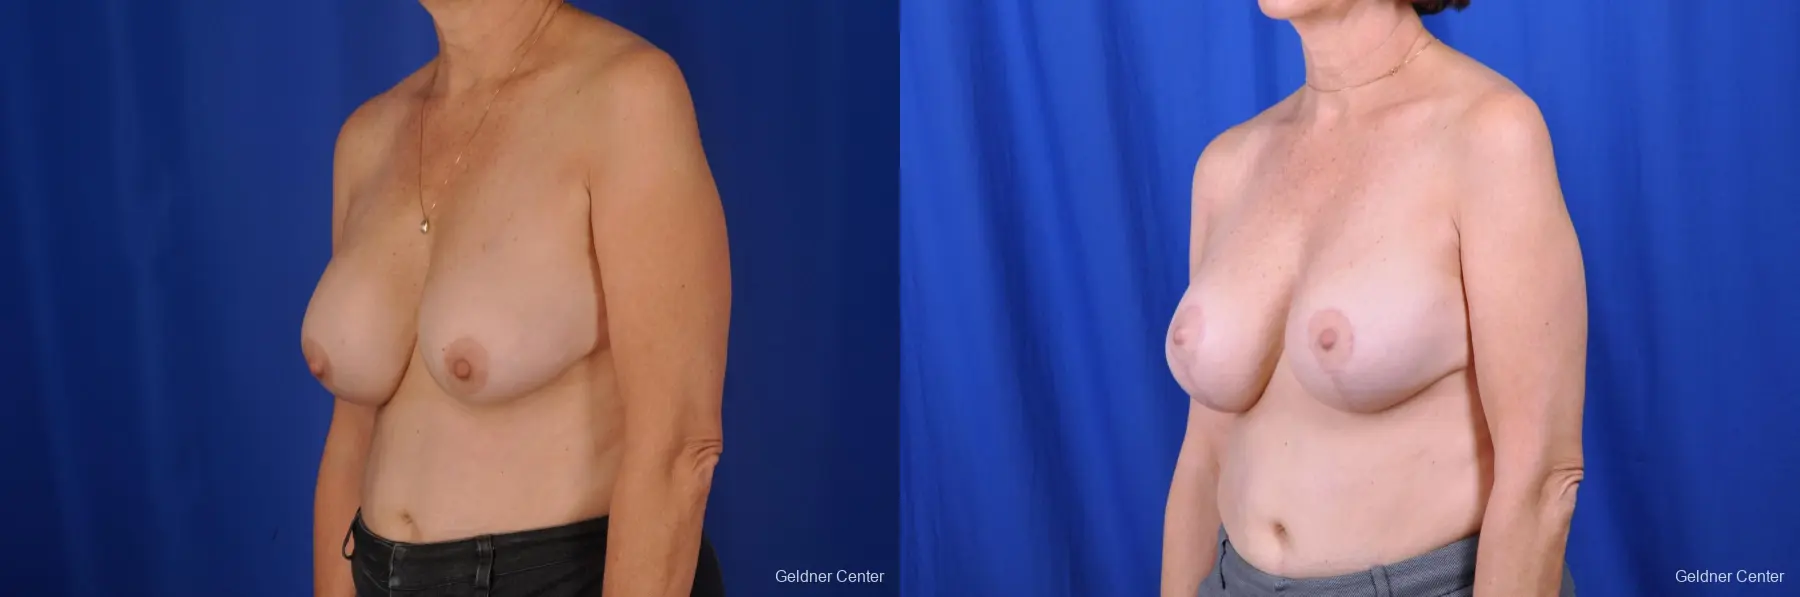 Breast Augmentation Lake Shore Dr, Chicago 2057 - Before and After 4